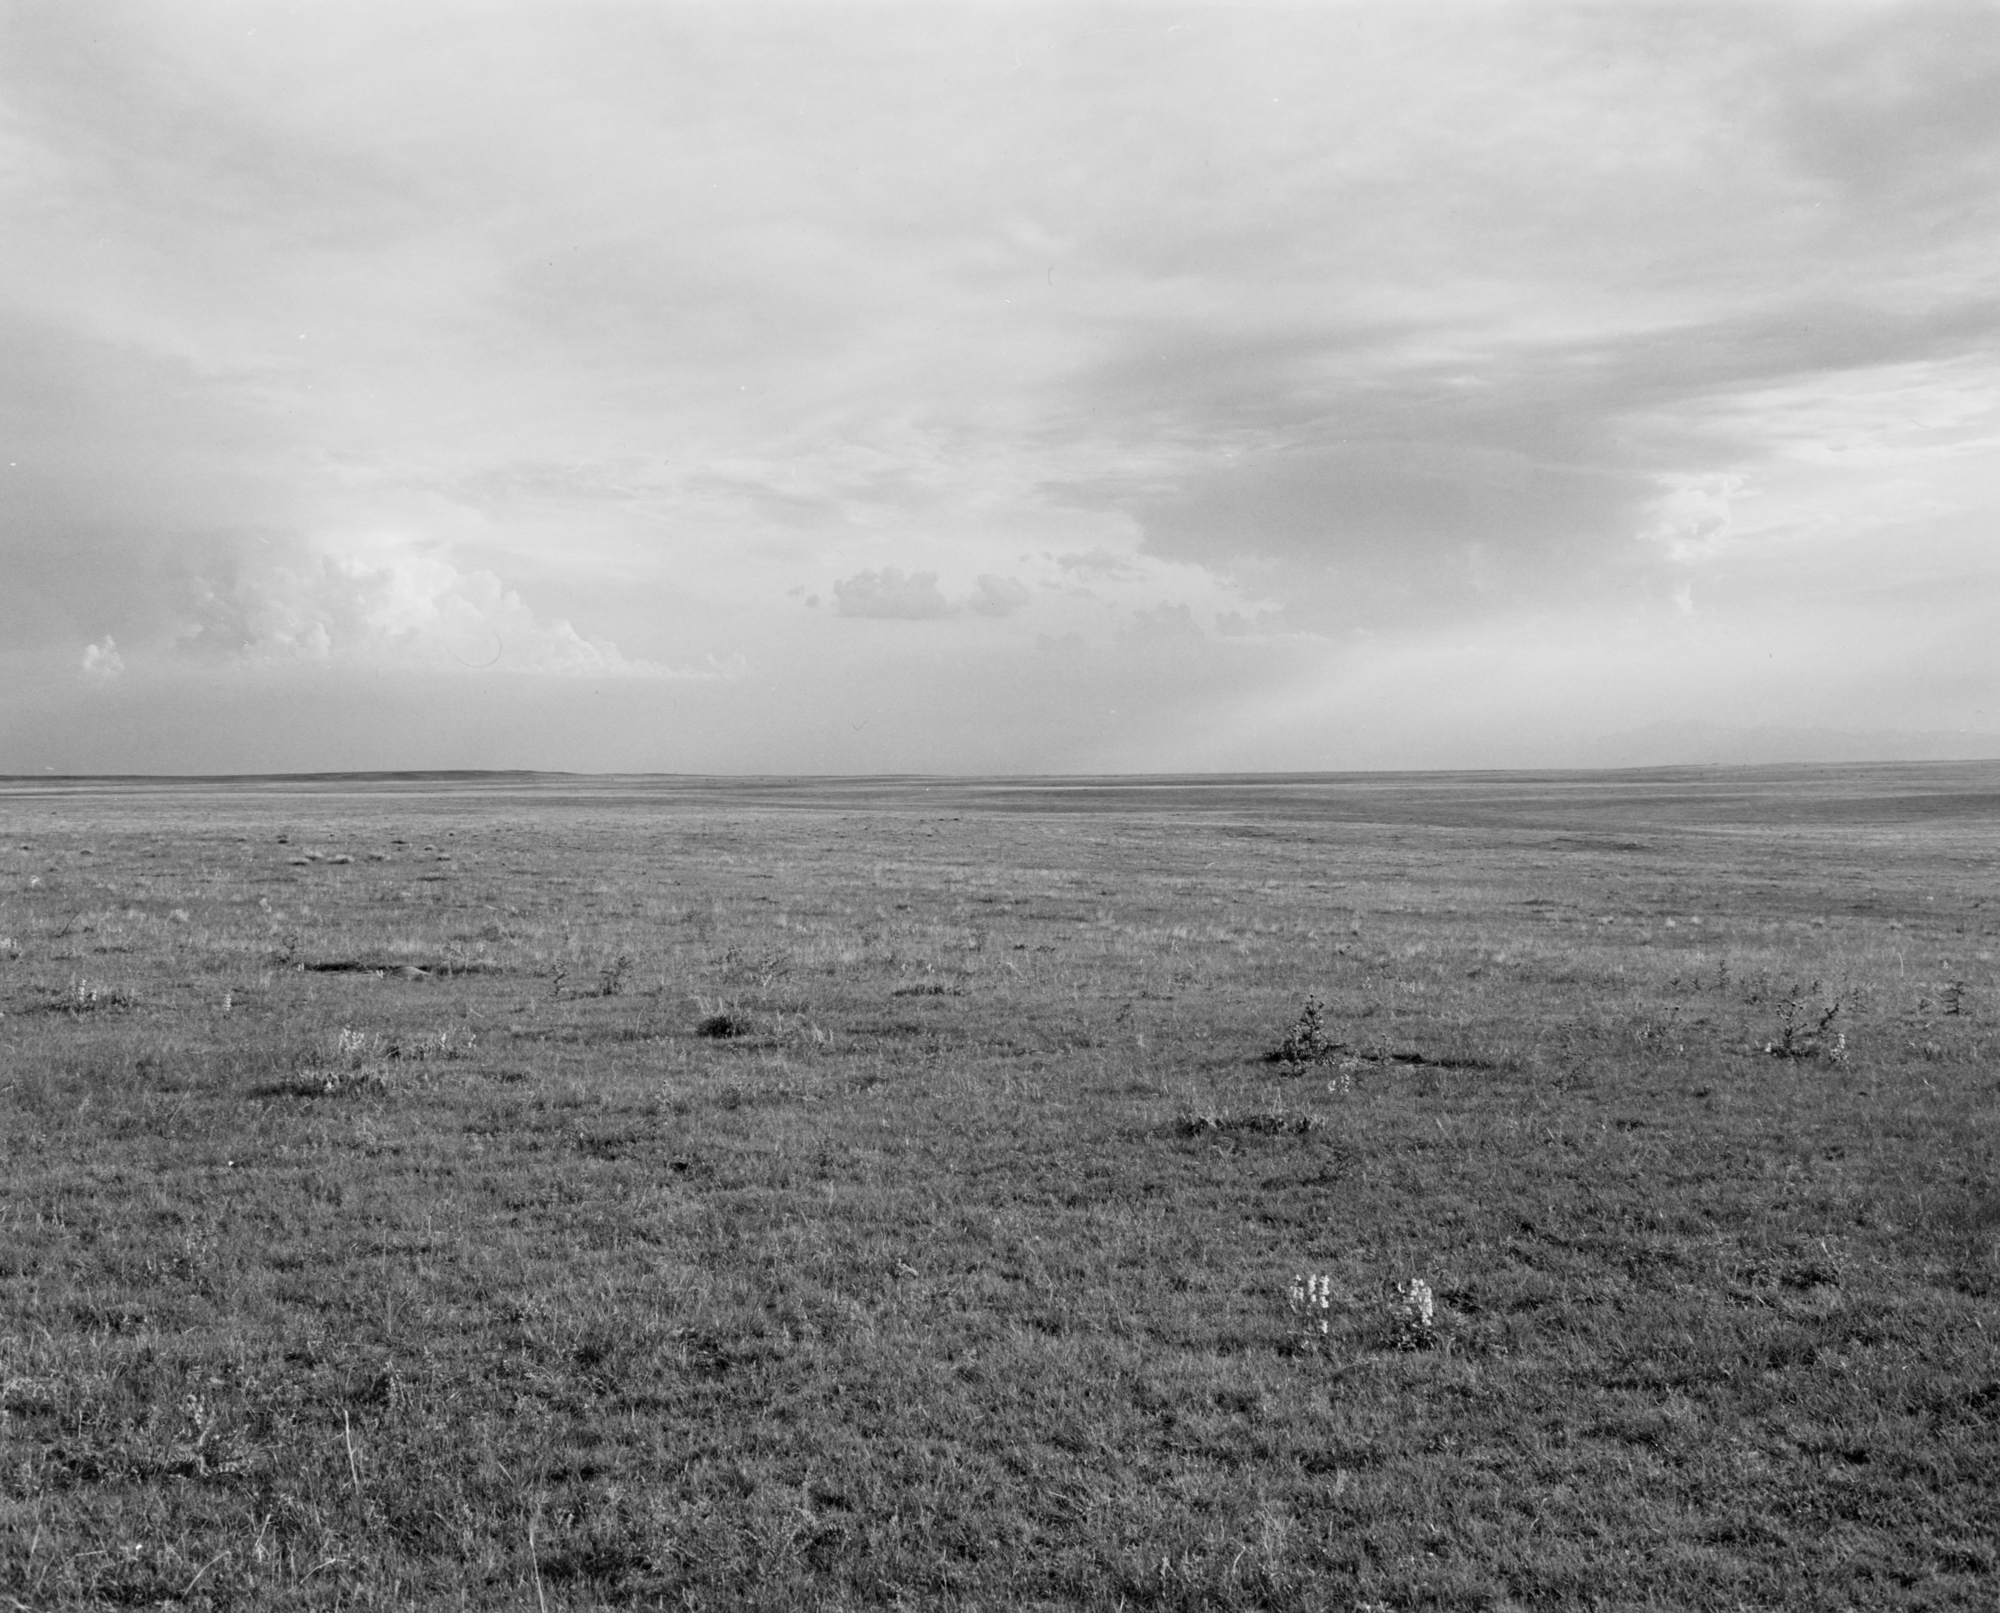 Black and white photograph of an empty grassy plain